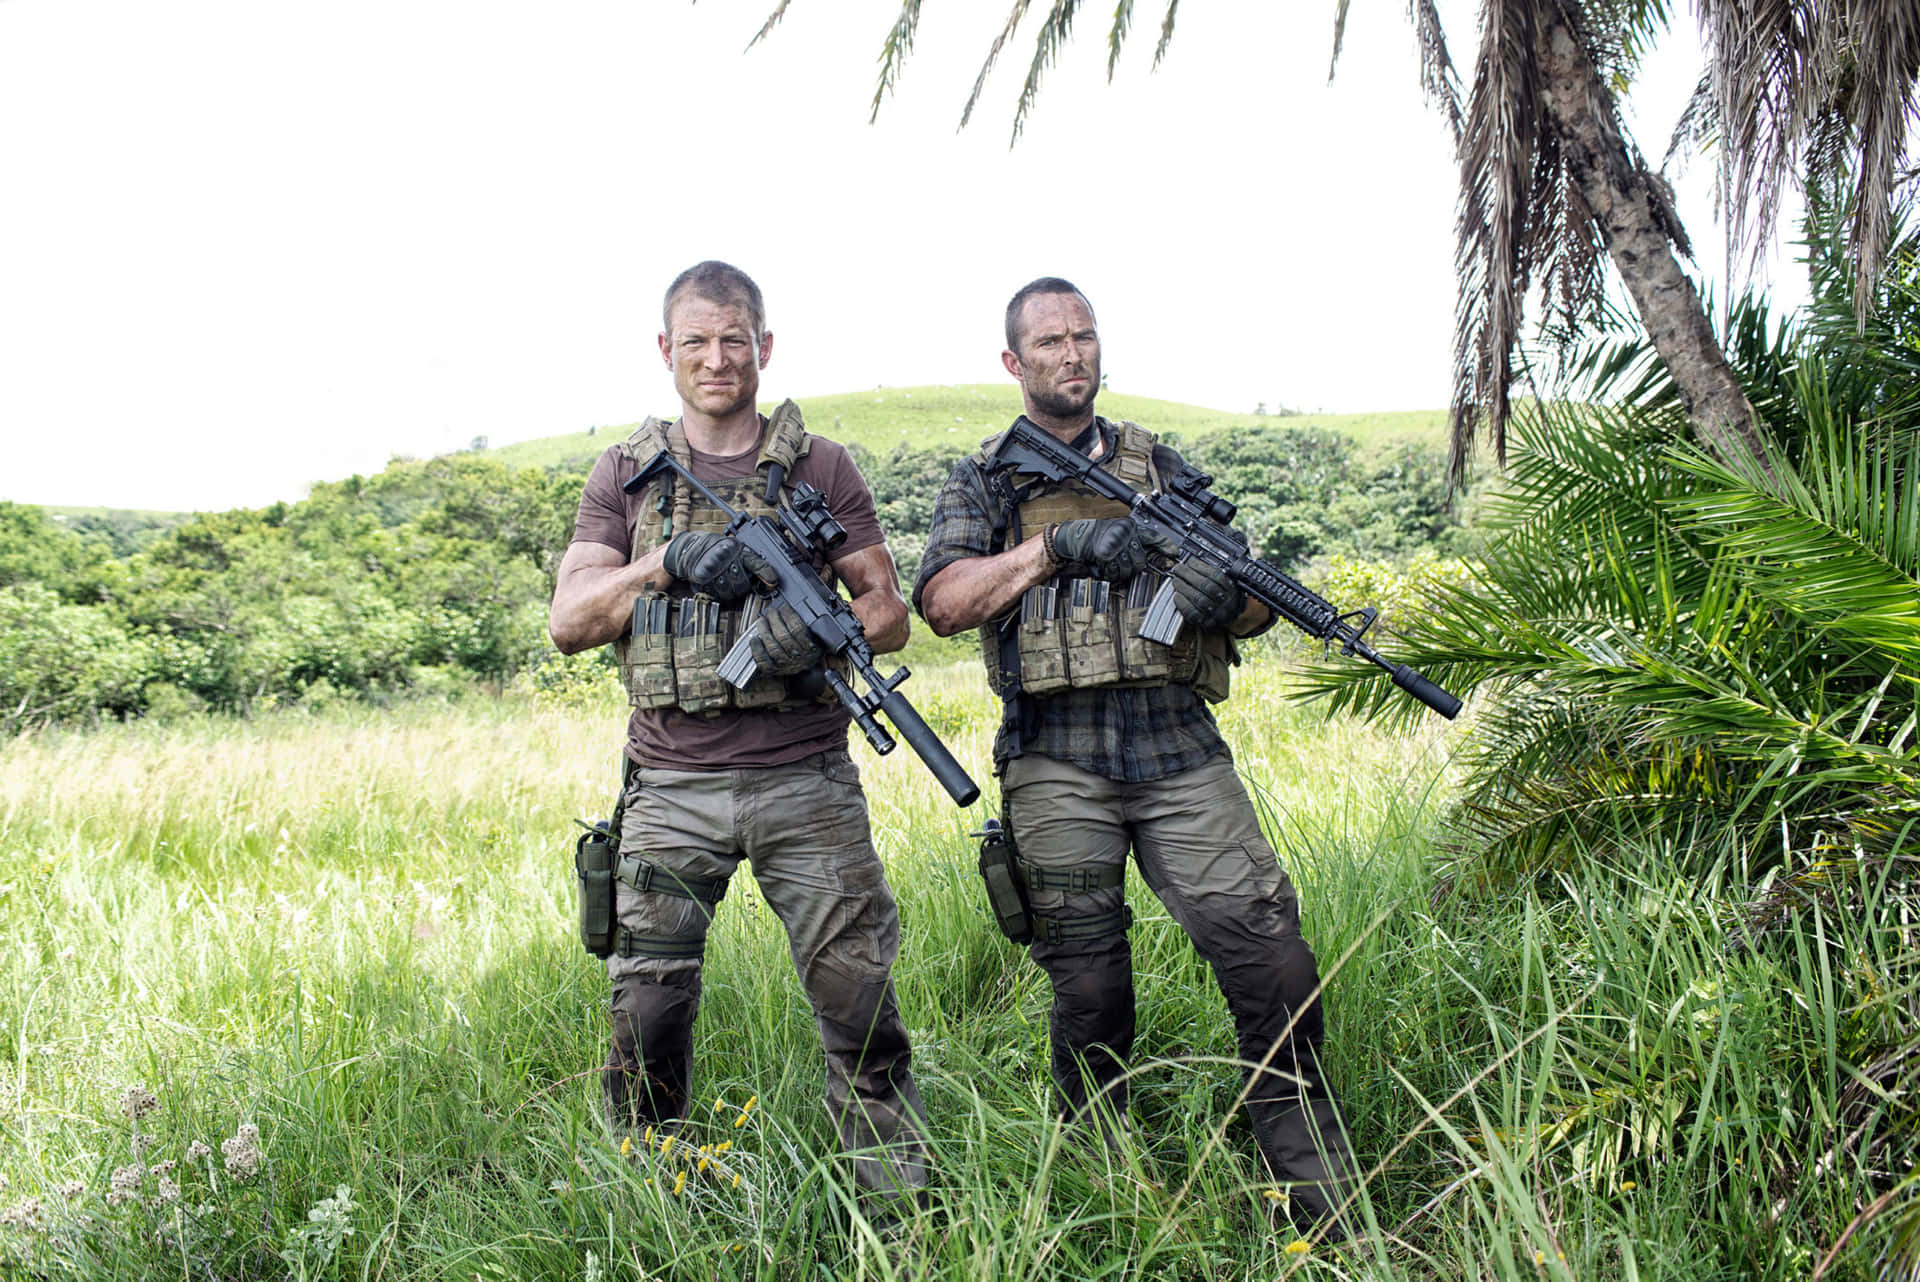 Armed_ Military_ Characters_in_ Greenery Wallpaper